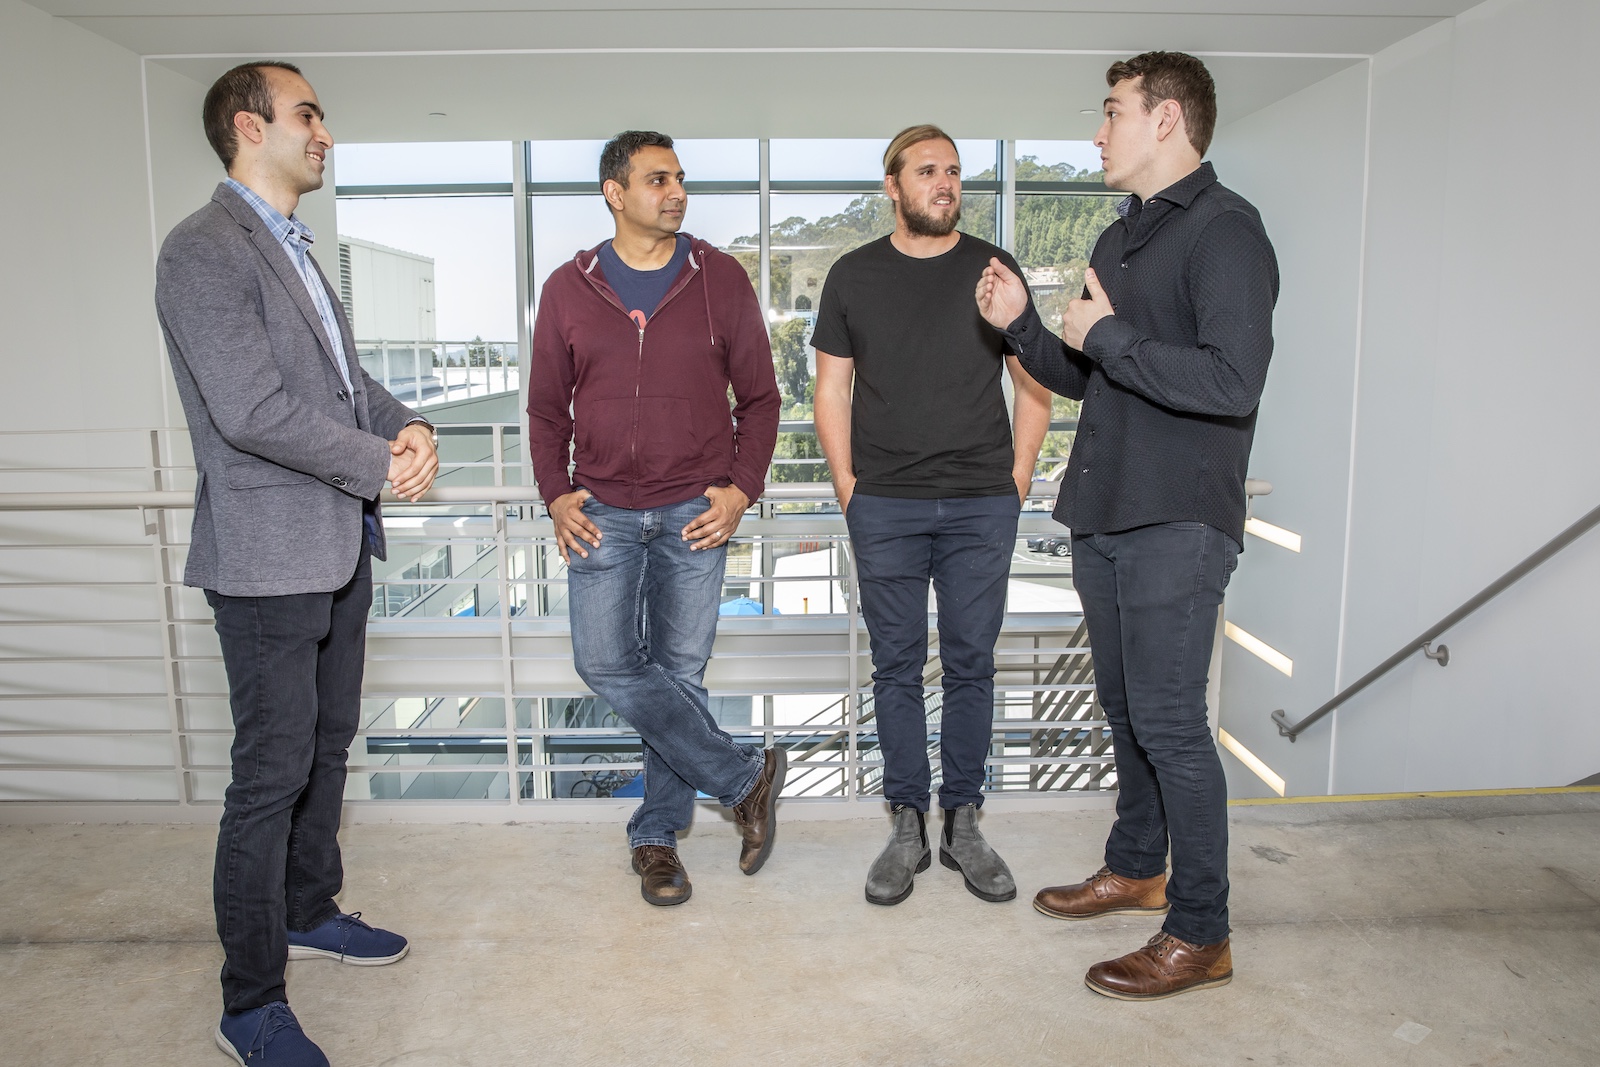 Photo - From left to right: Vahe Tshitoyan, Anubhav Jain, Leigh Weston, and John Dagdelen were among the participants in a text-mining project that used machine learning to analyze 3.3 million abstracts from materials science papers. (Credit: Marilyn Chung/Berkeley Lab)